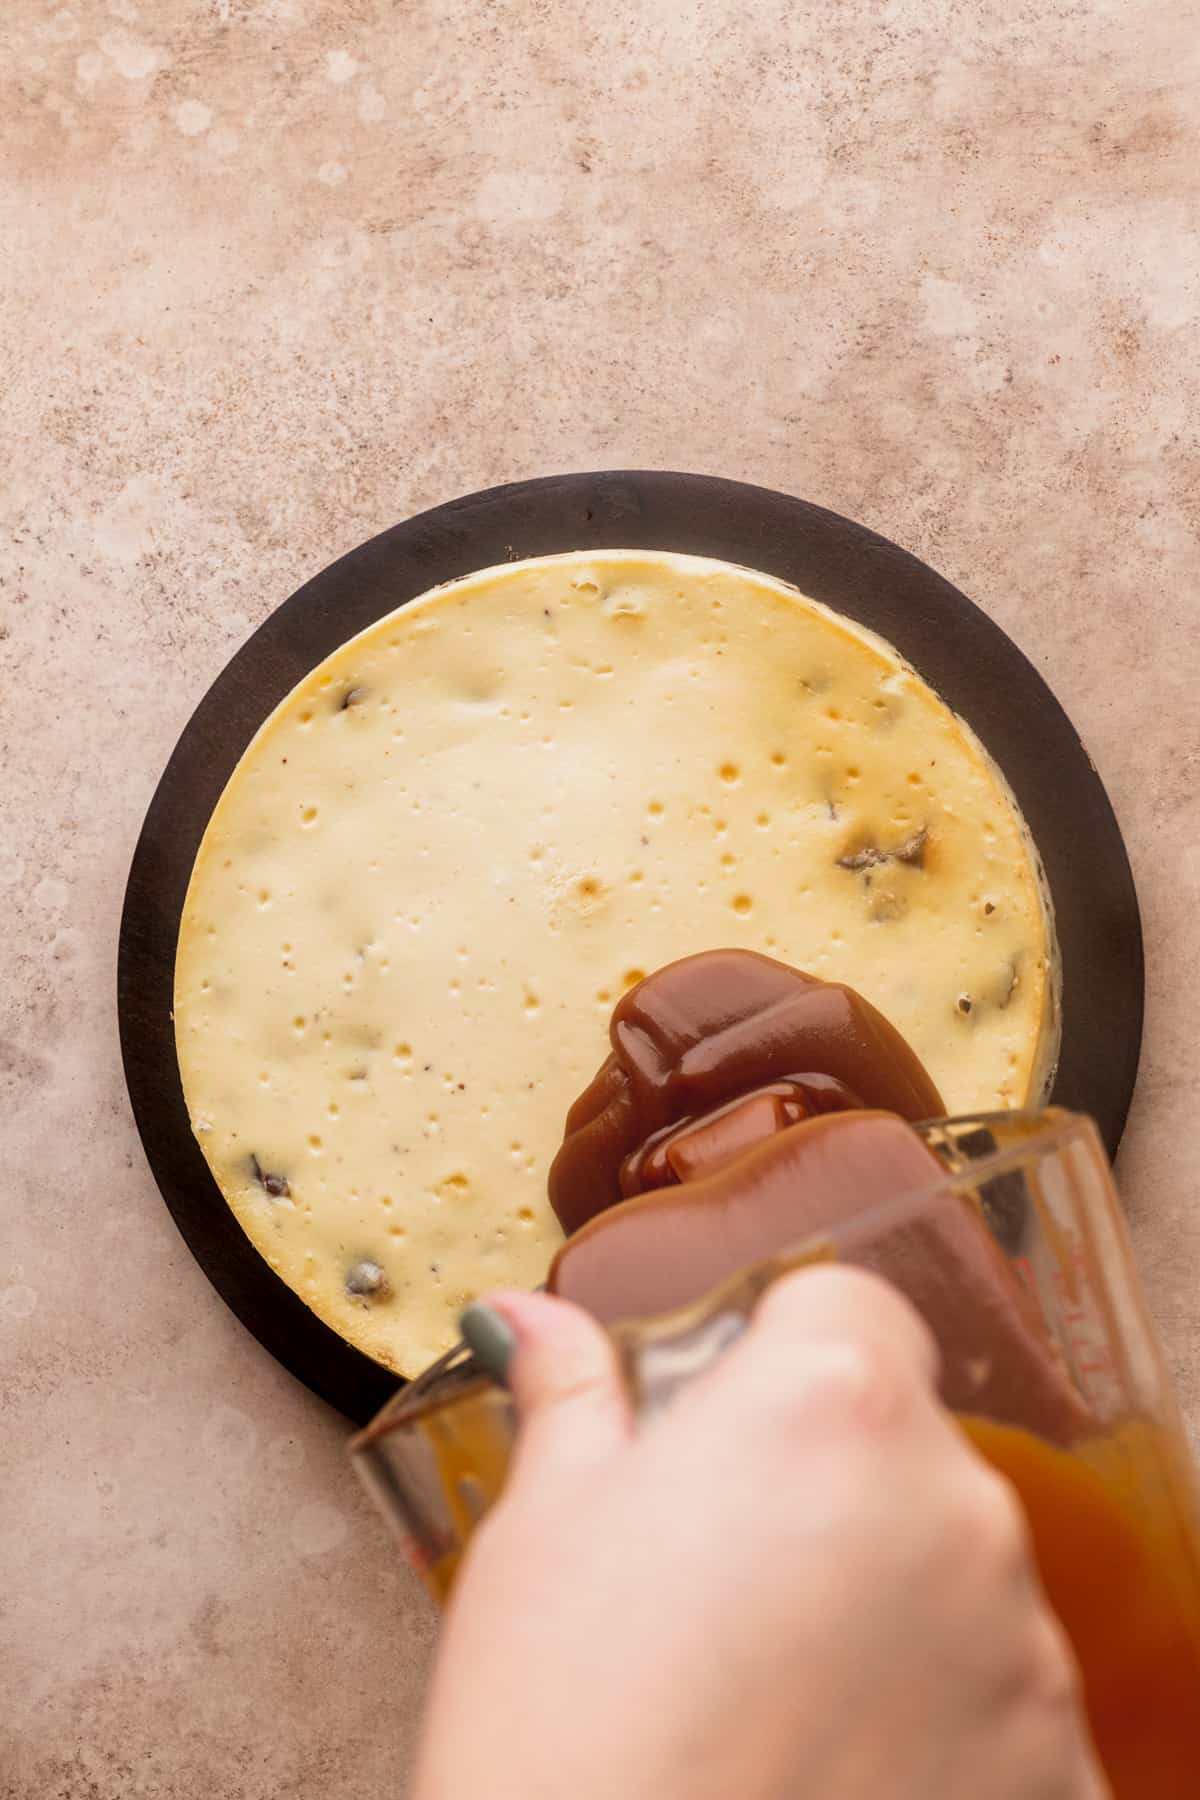 Pouring caramel on top of cheesecake.